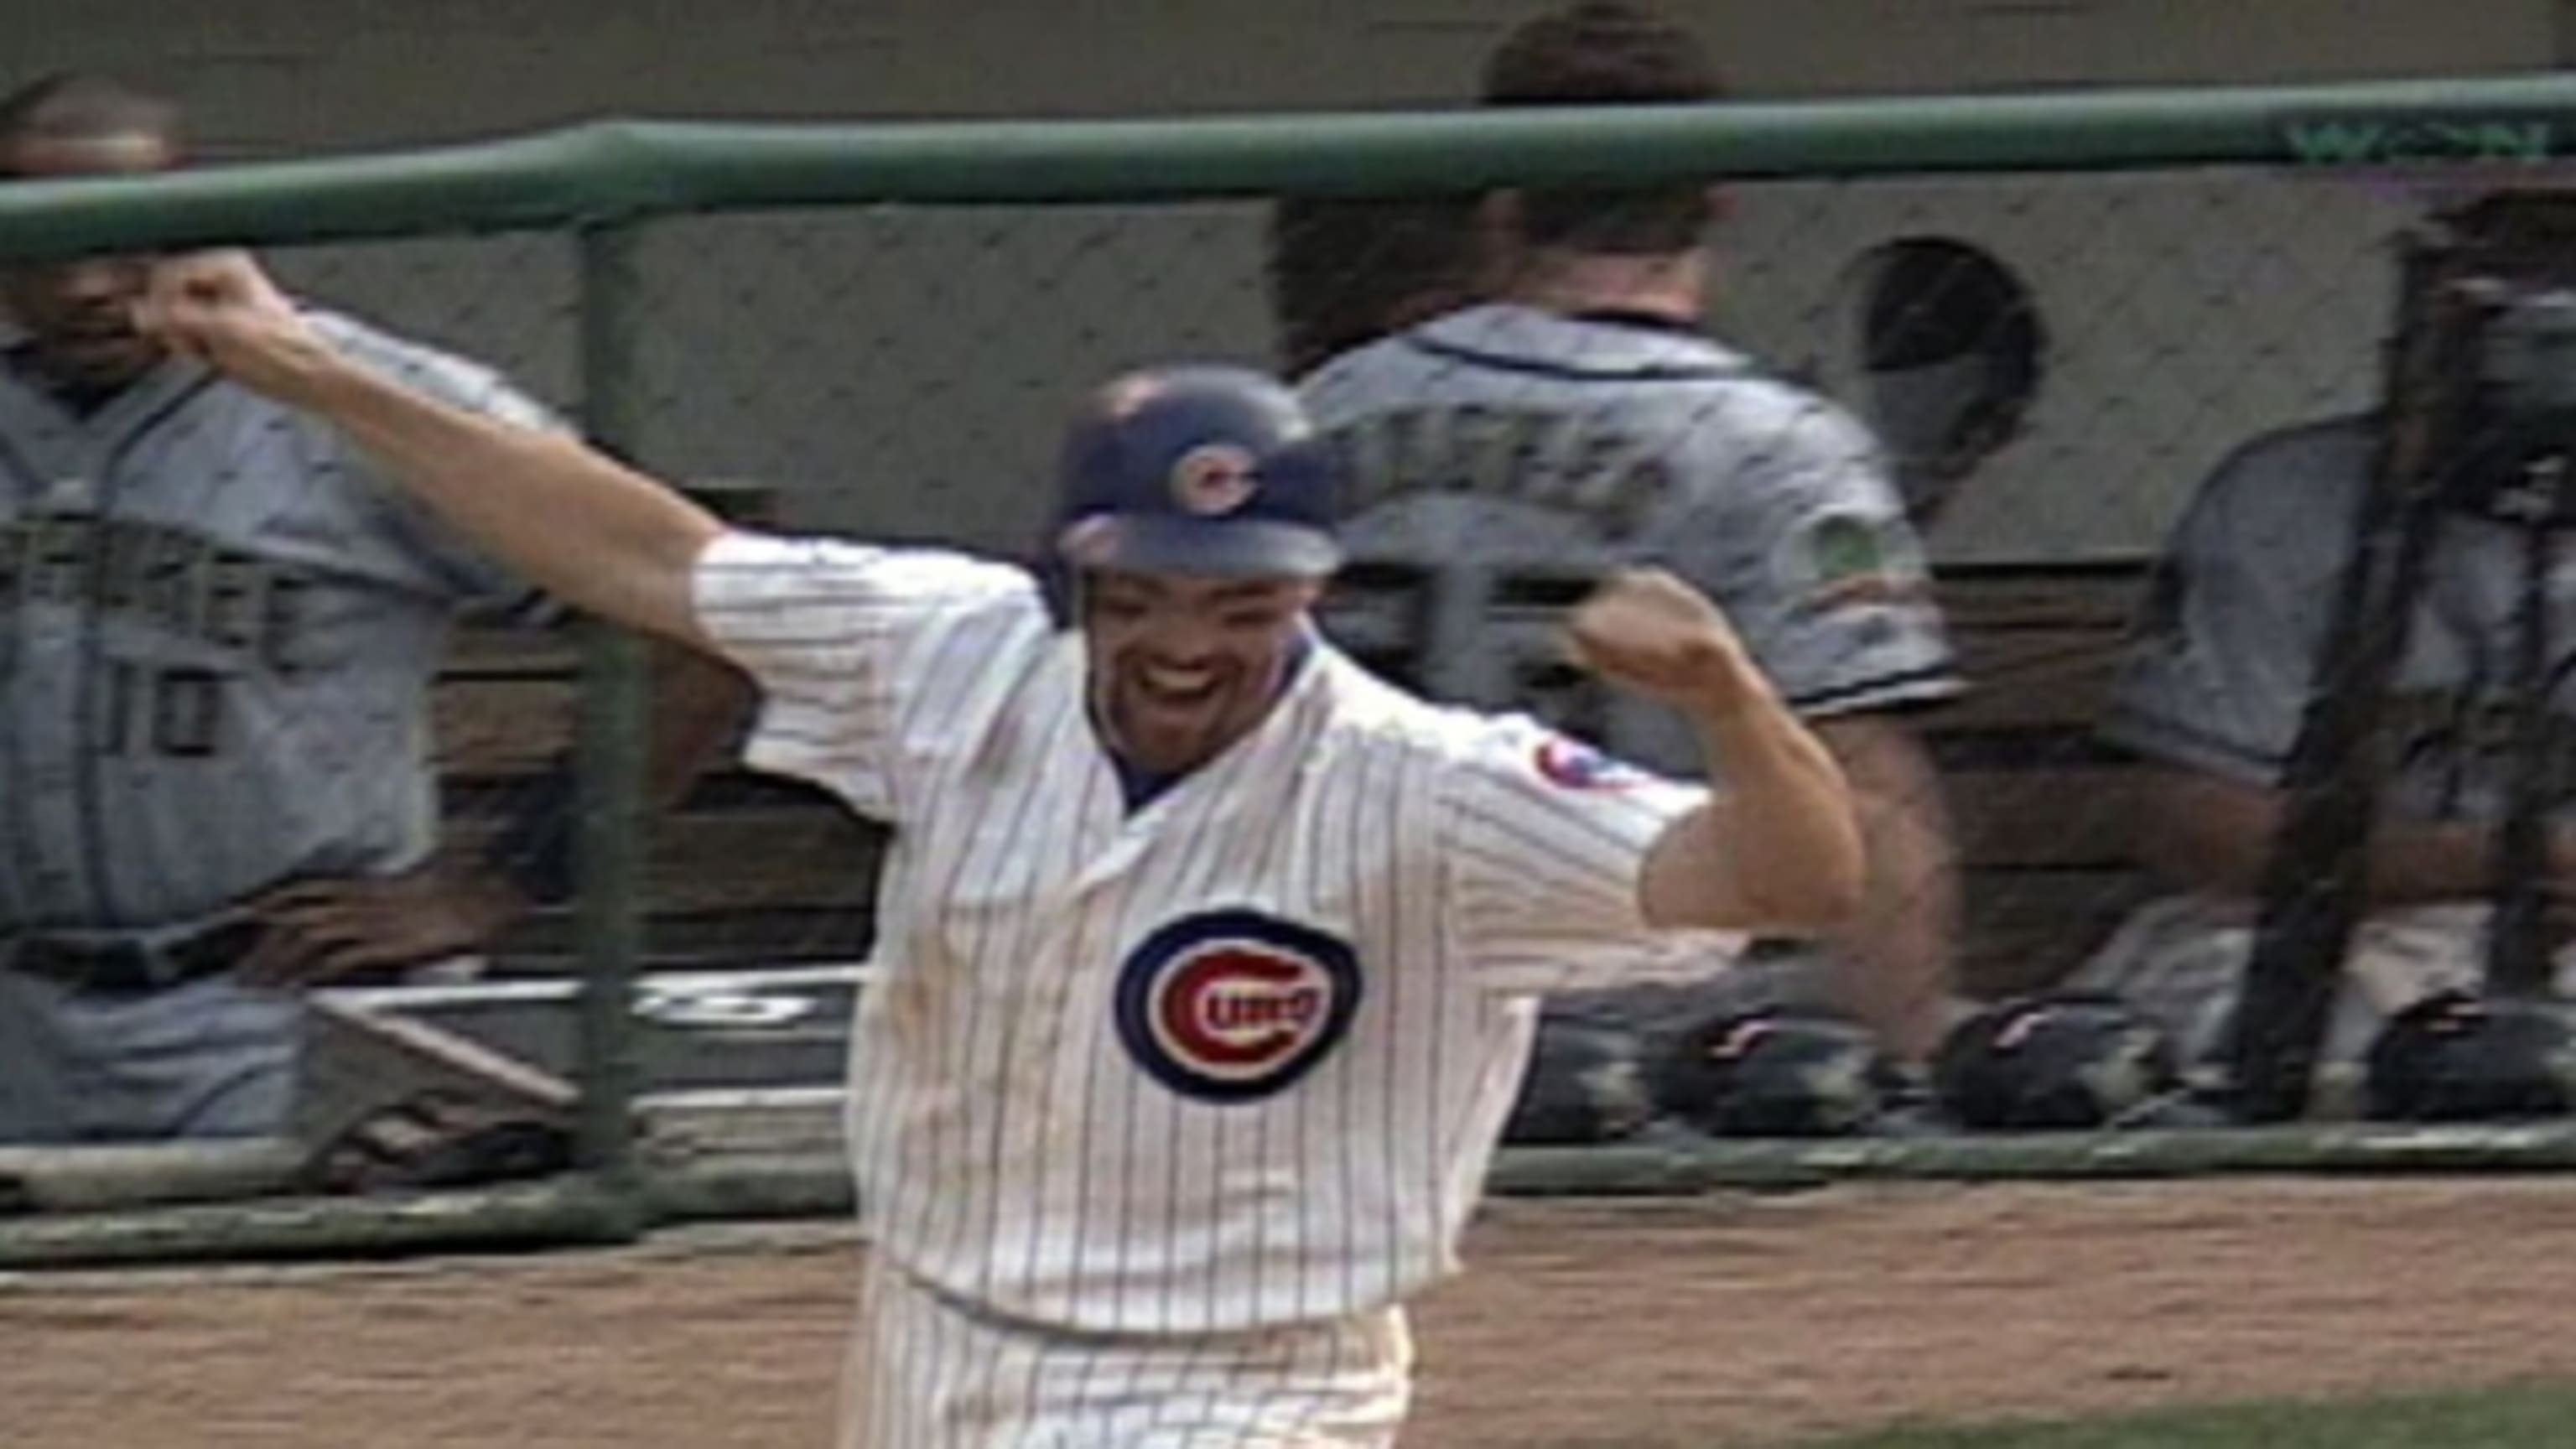 Shawon Dunston, Mark Grace Being Inducted into Cubs Hall of Fame - Cubs  Insider